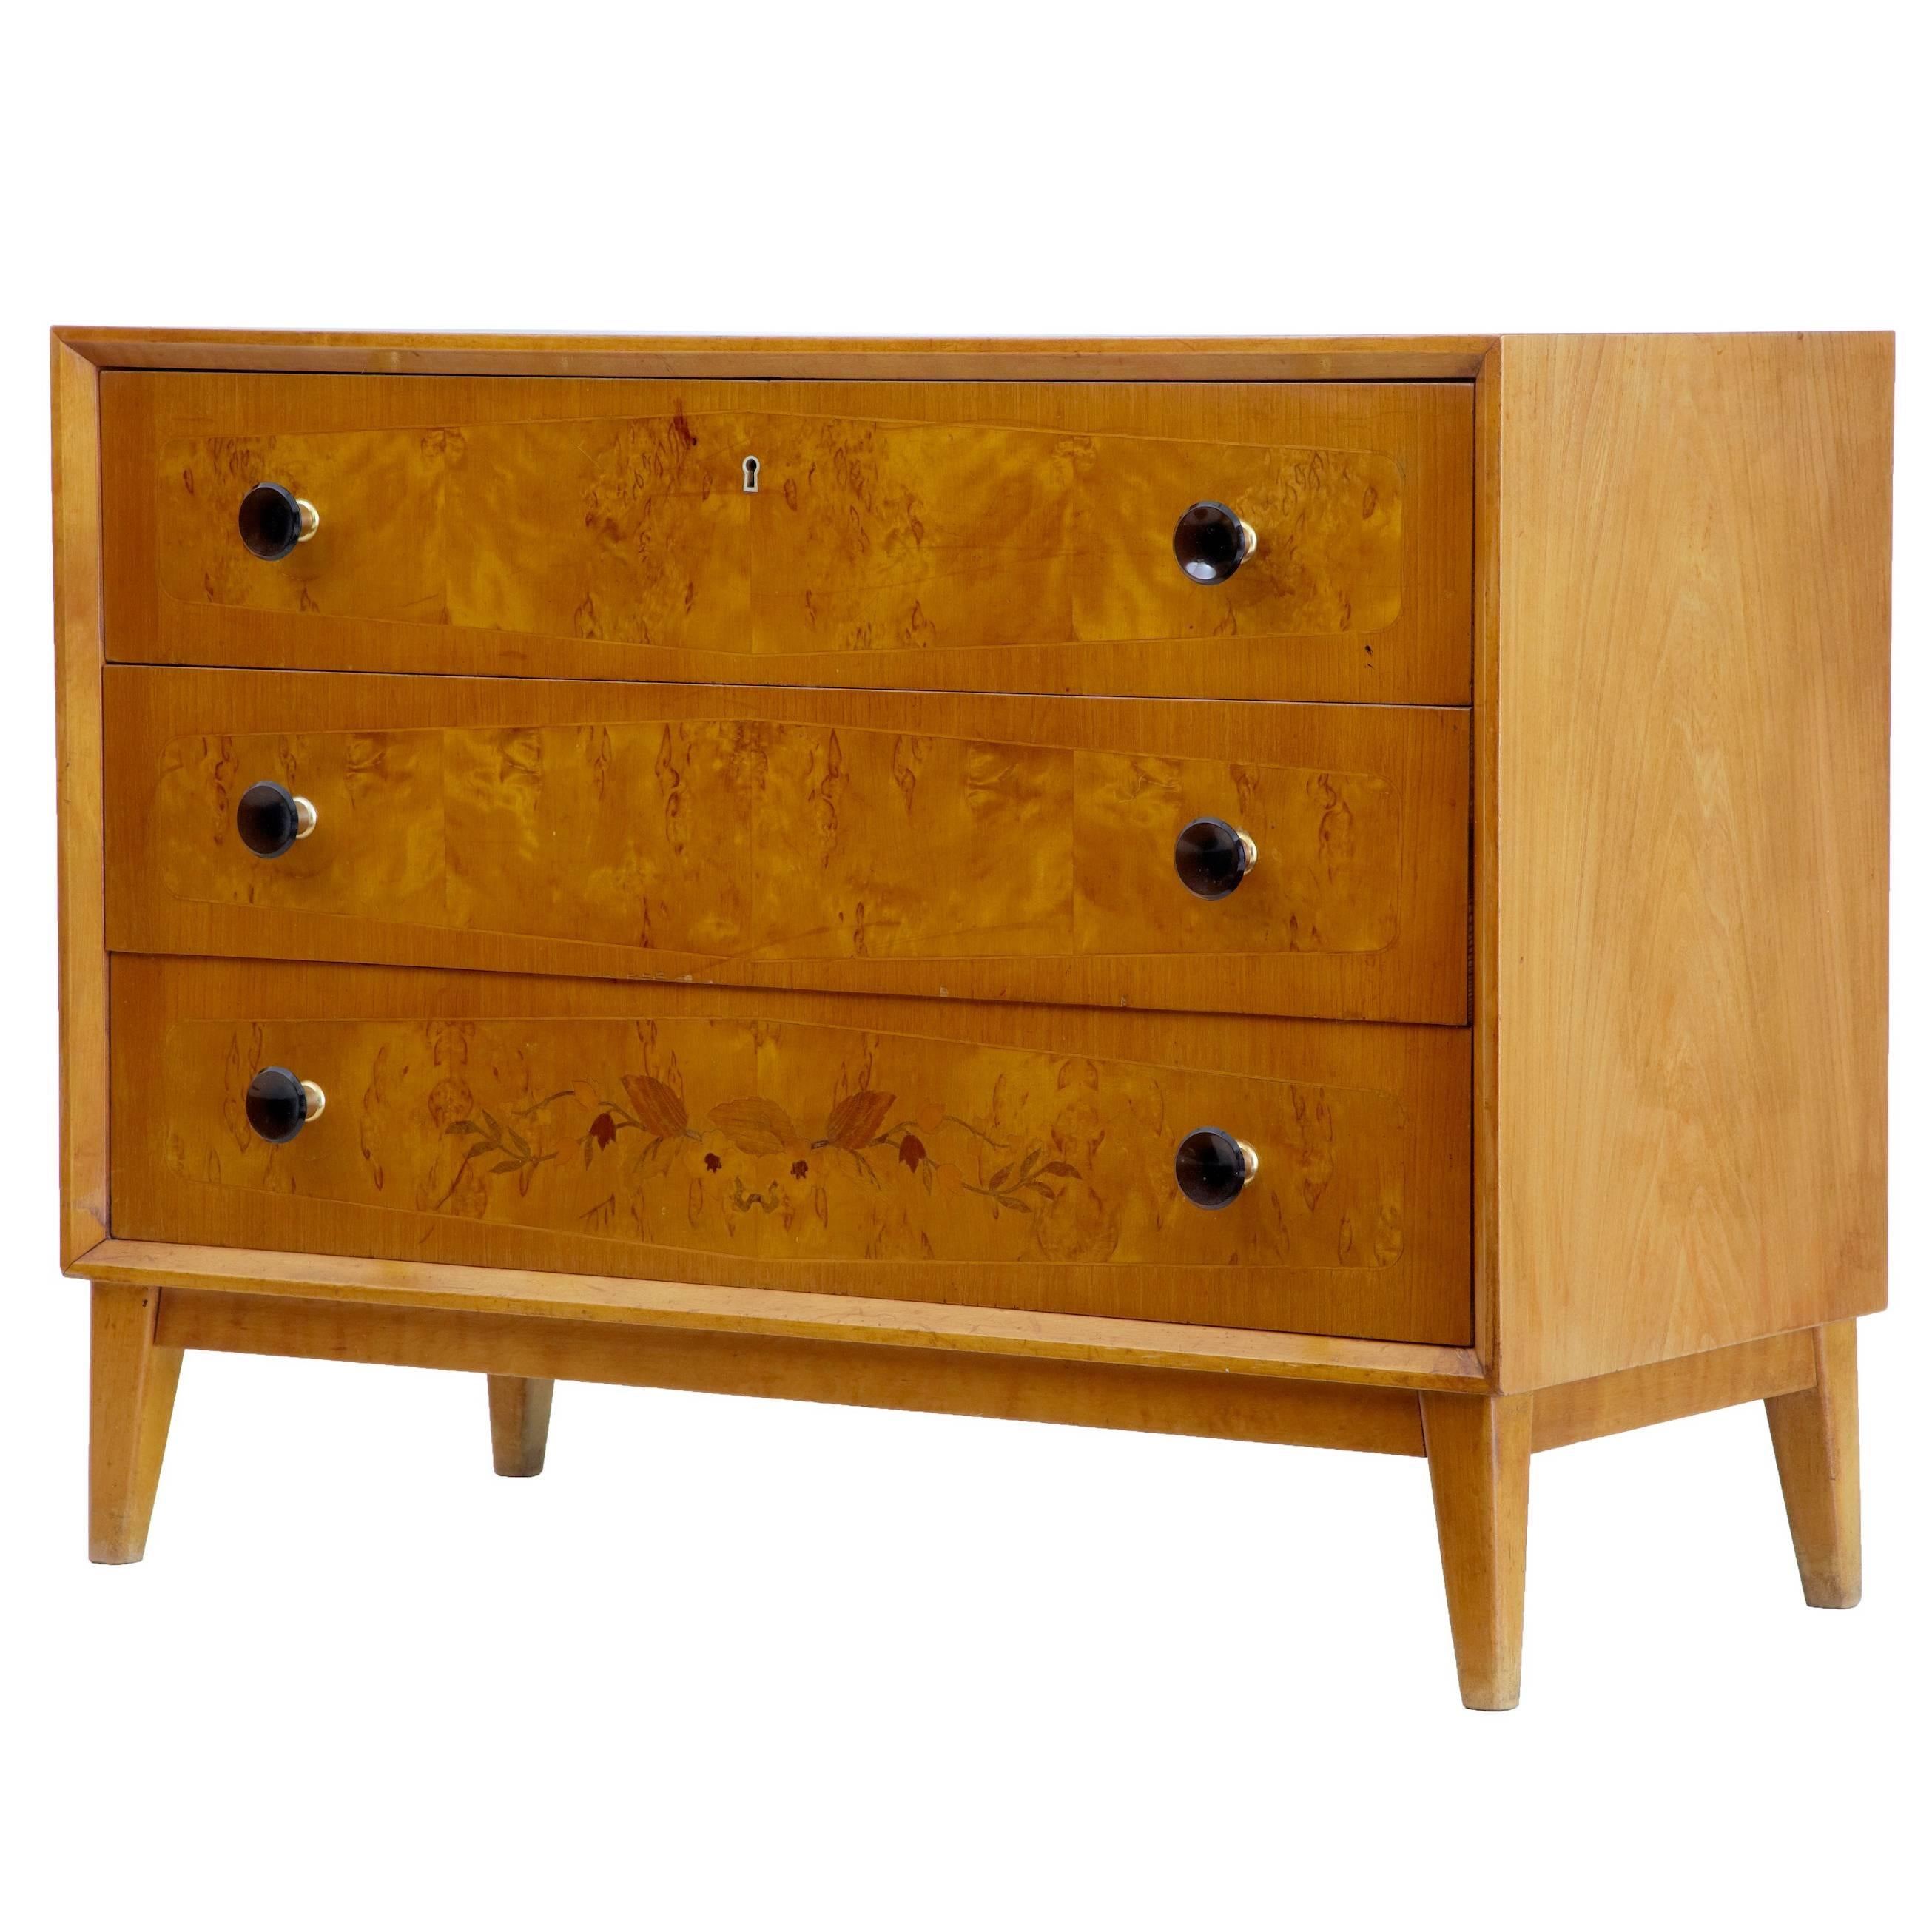 1950s Later Art Deco Birch Inlaid Chest of Drawers